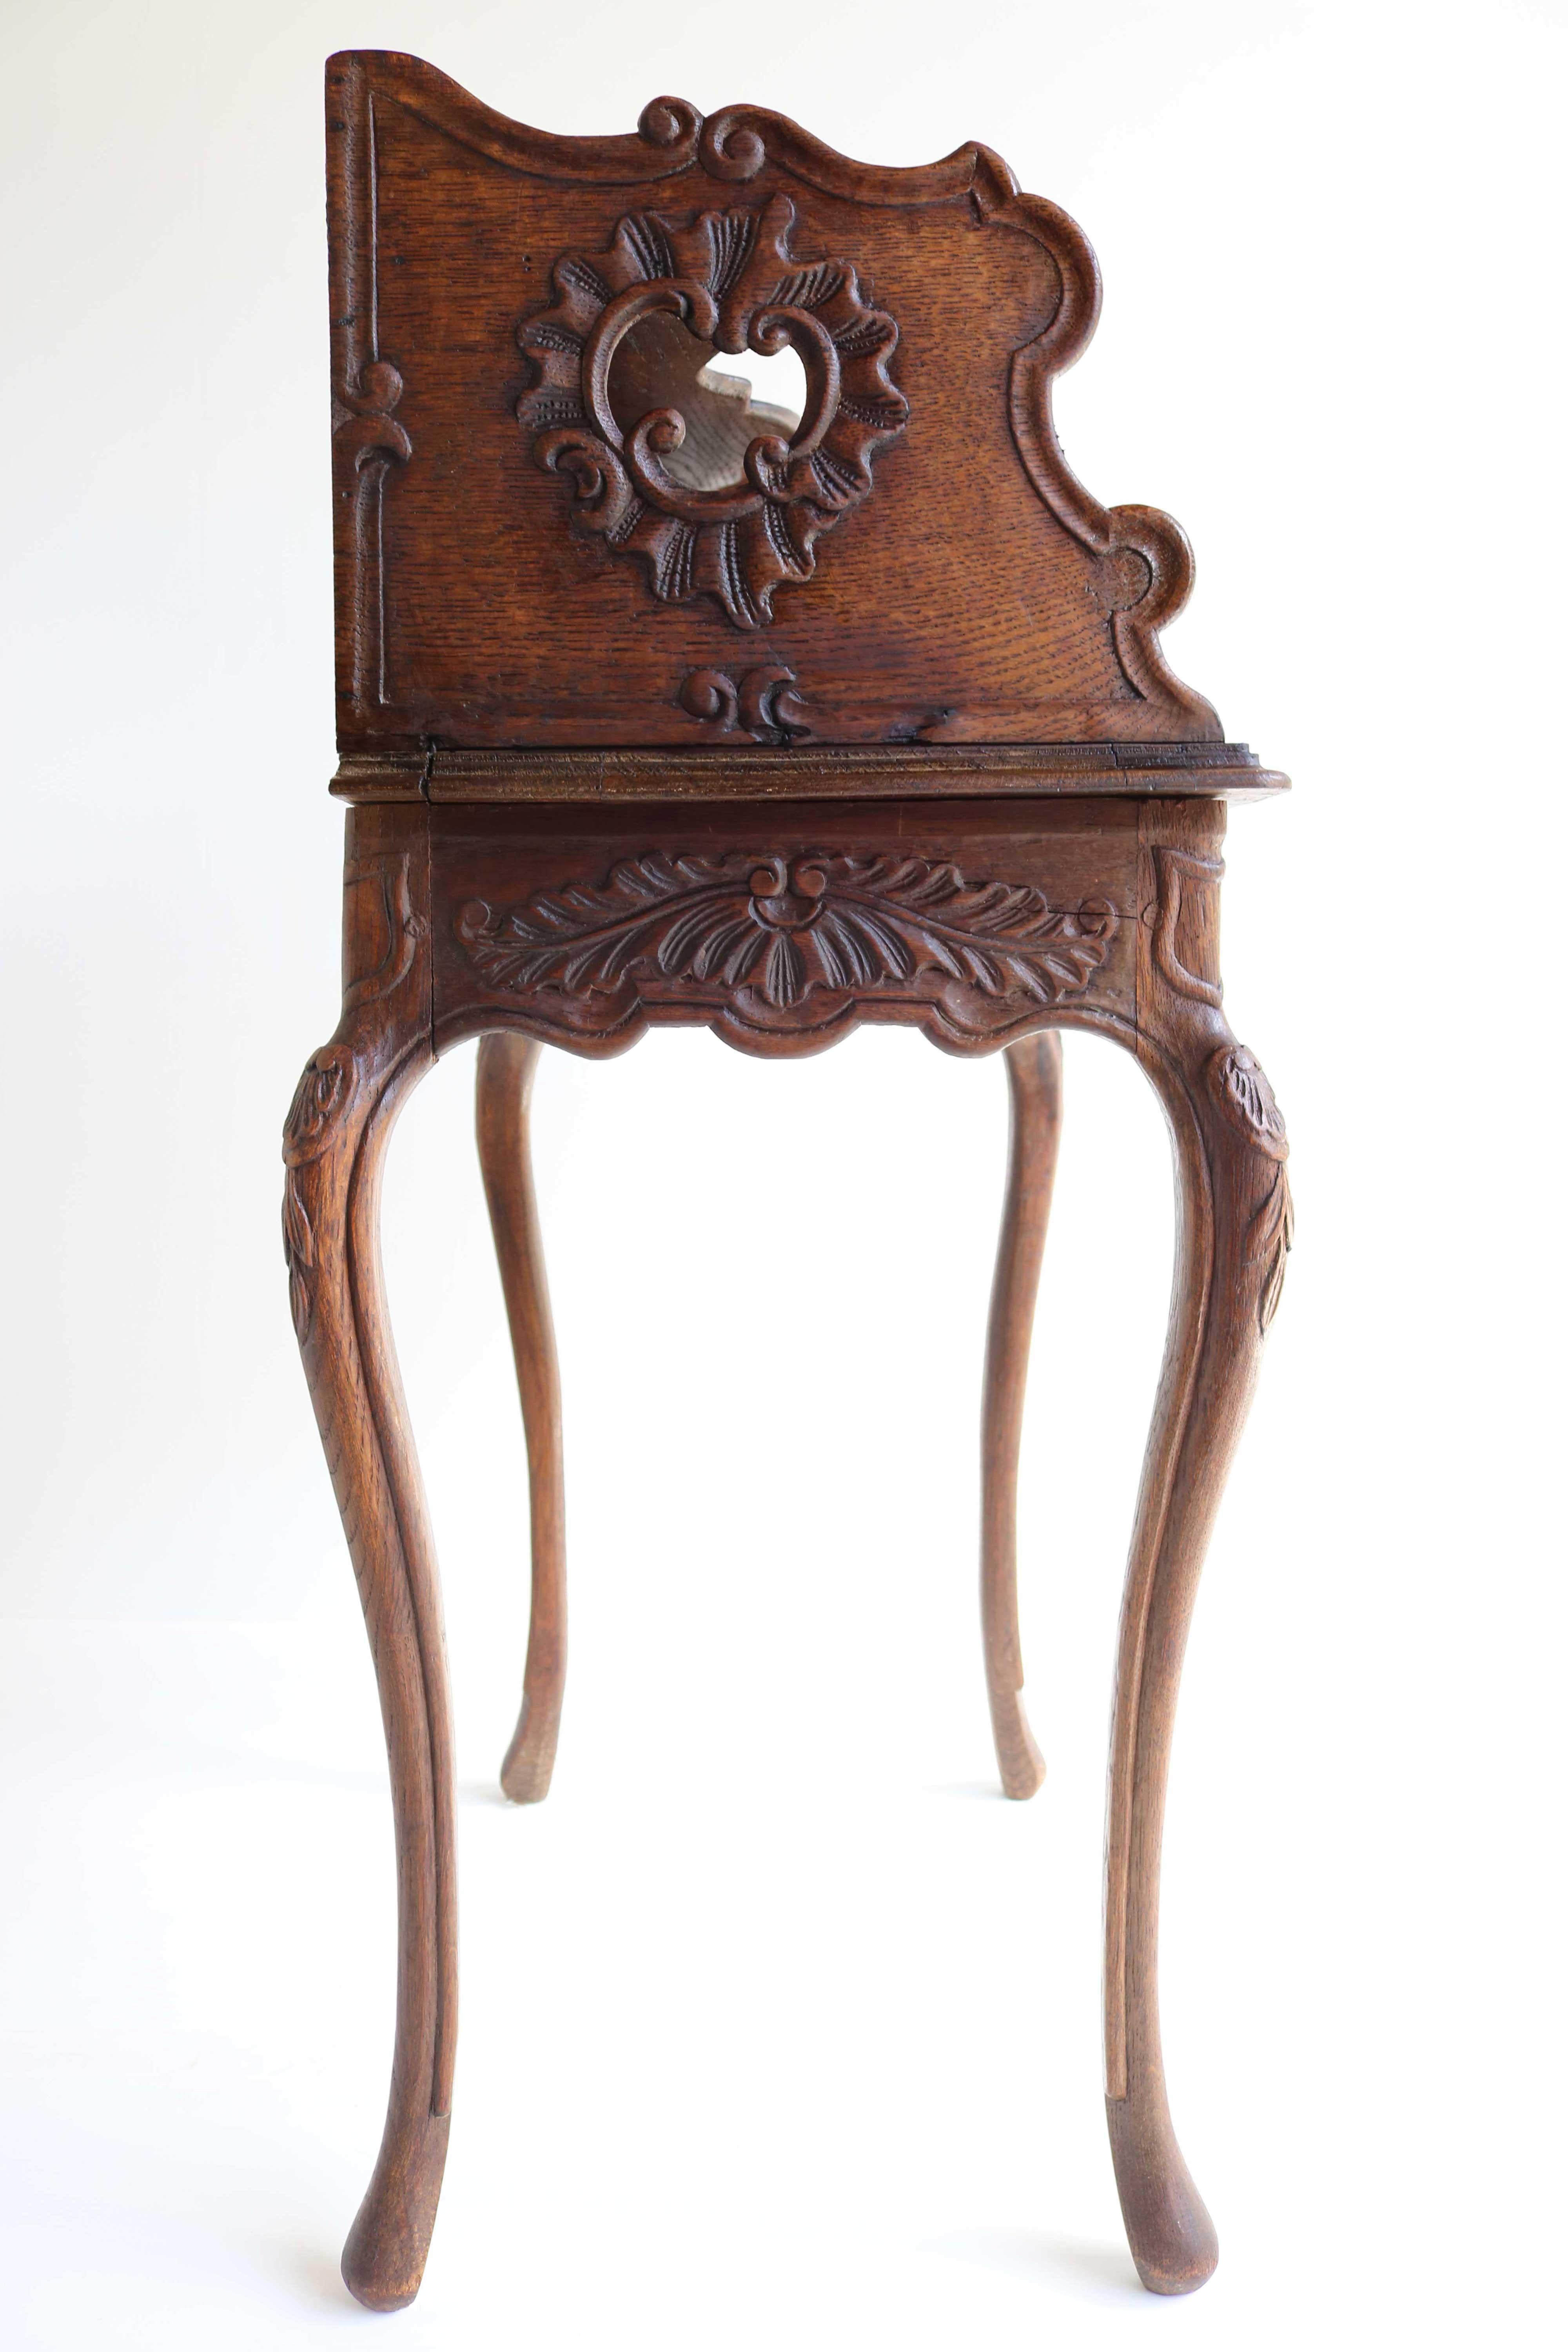 20th Century Antique Country French Carved Oak Bedside Table Nightstand Louis XV Style 1900 For Sale